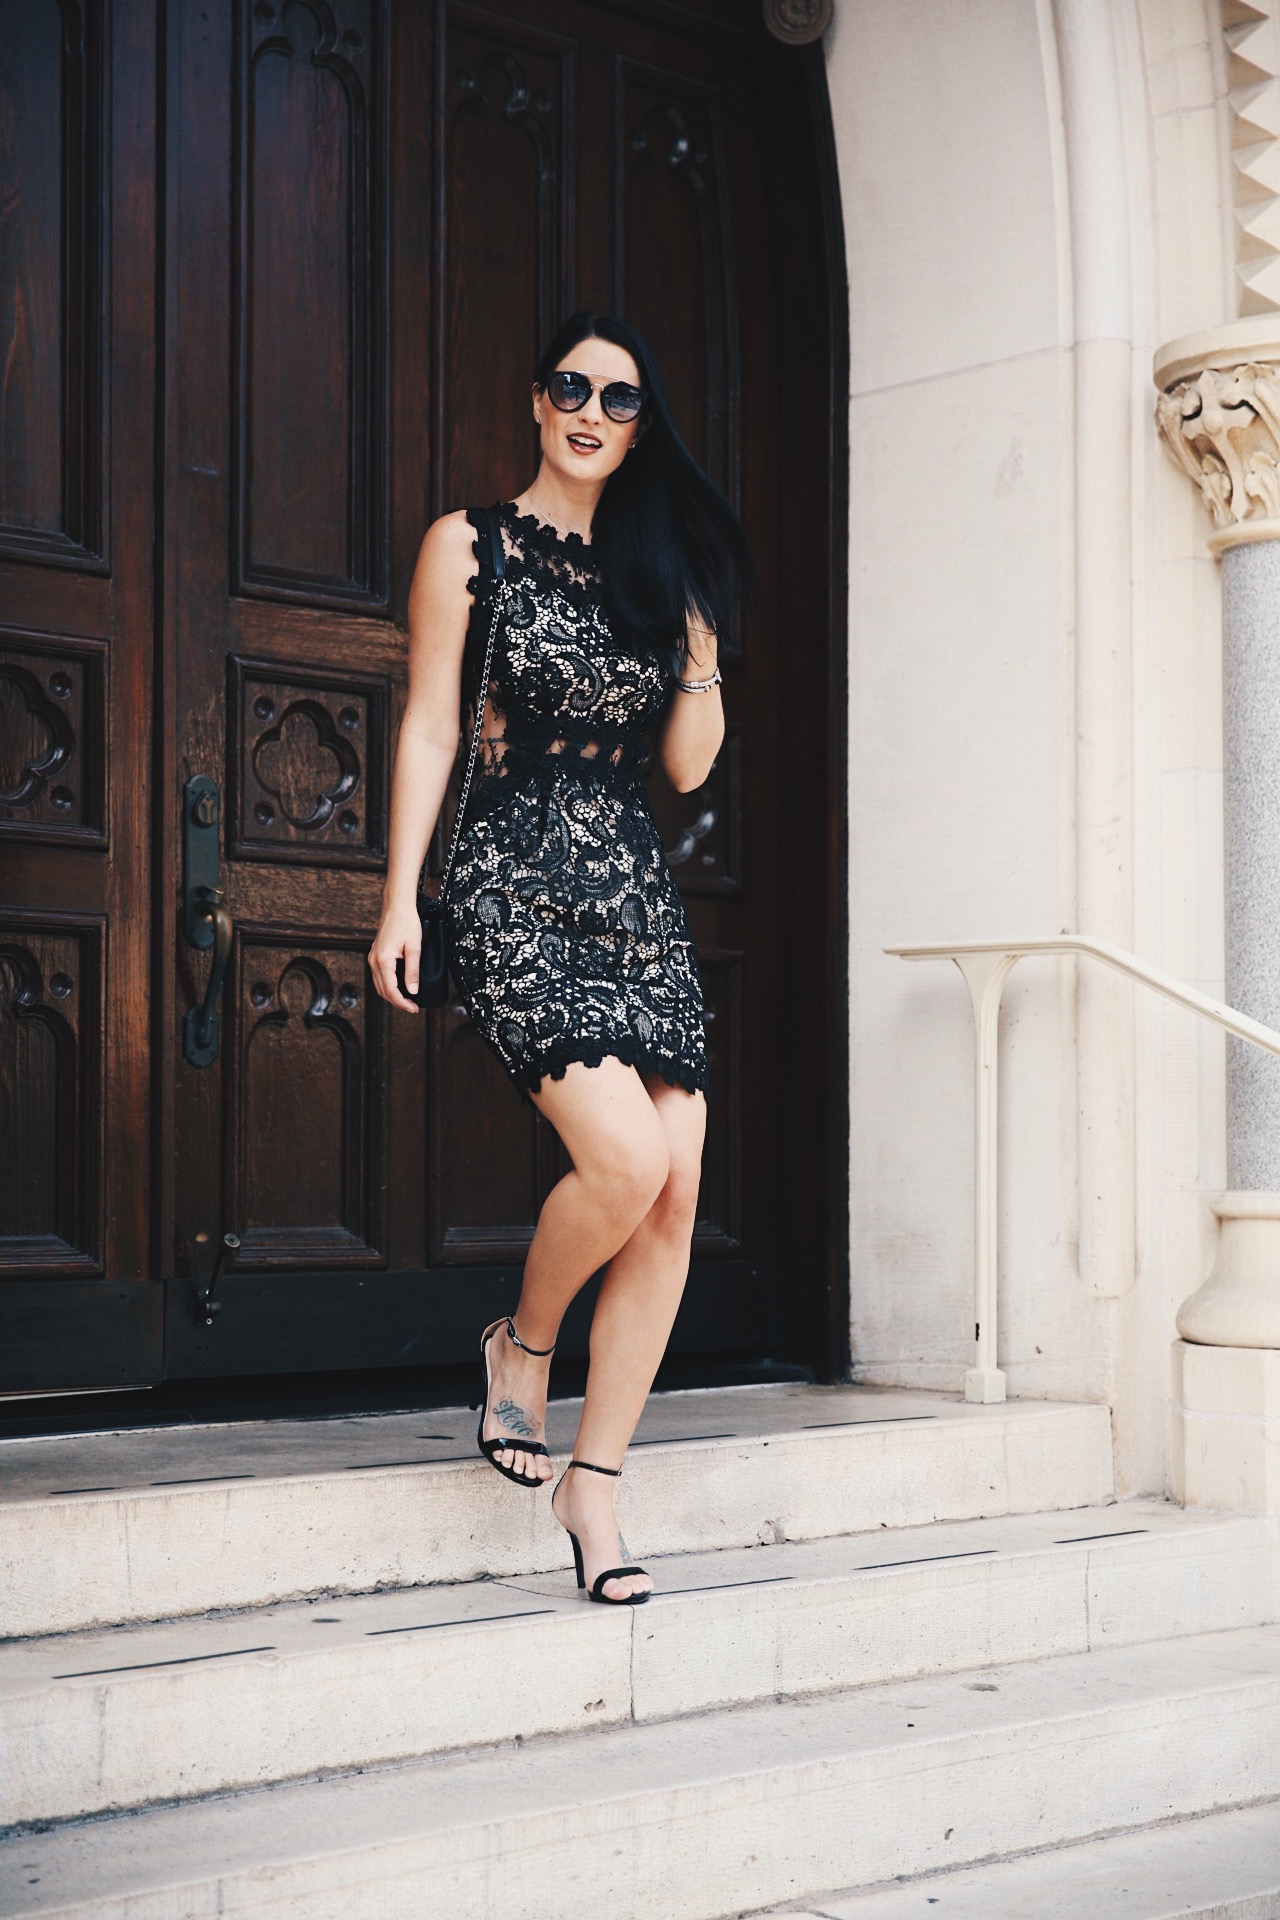 Black Lace Dress | Affordable Mini, Cocktail, Date Night Looks ...